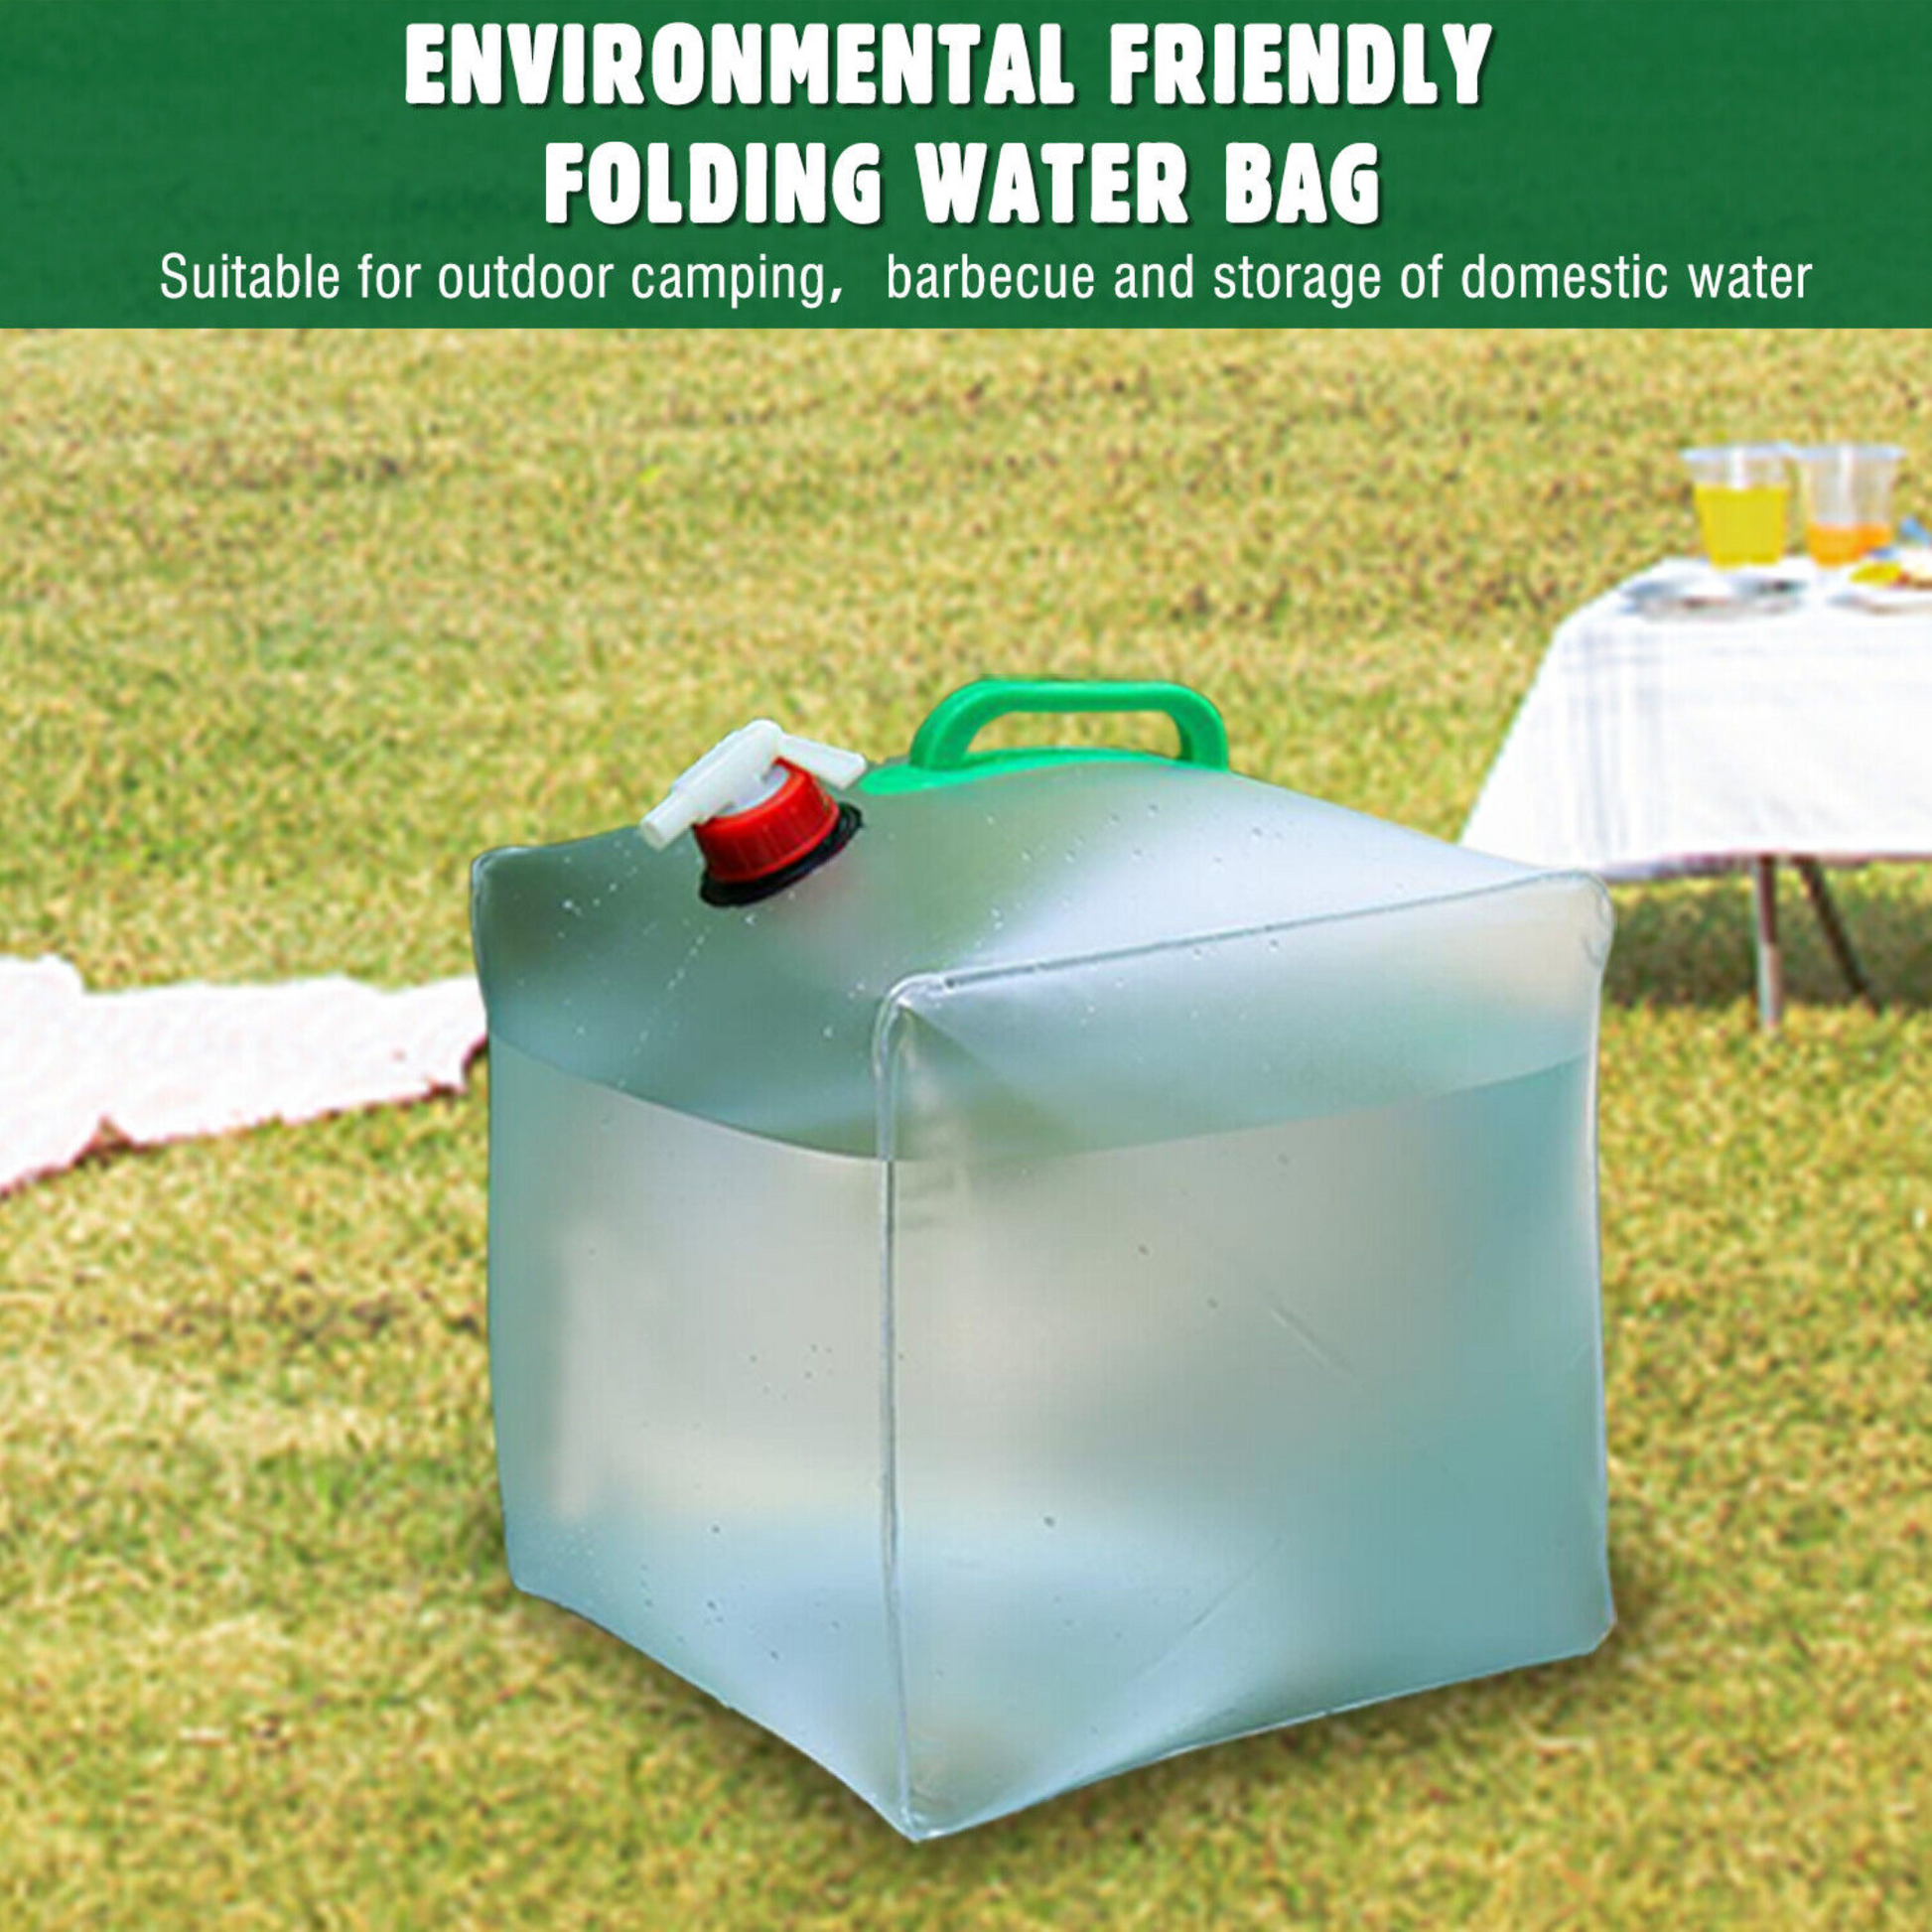 Convenient Camping Water Storage - Collapsible Water Container With Spigot - 5.2 Gallon Capacity